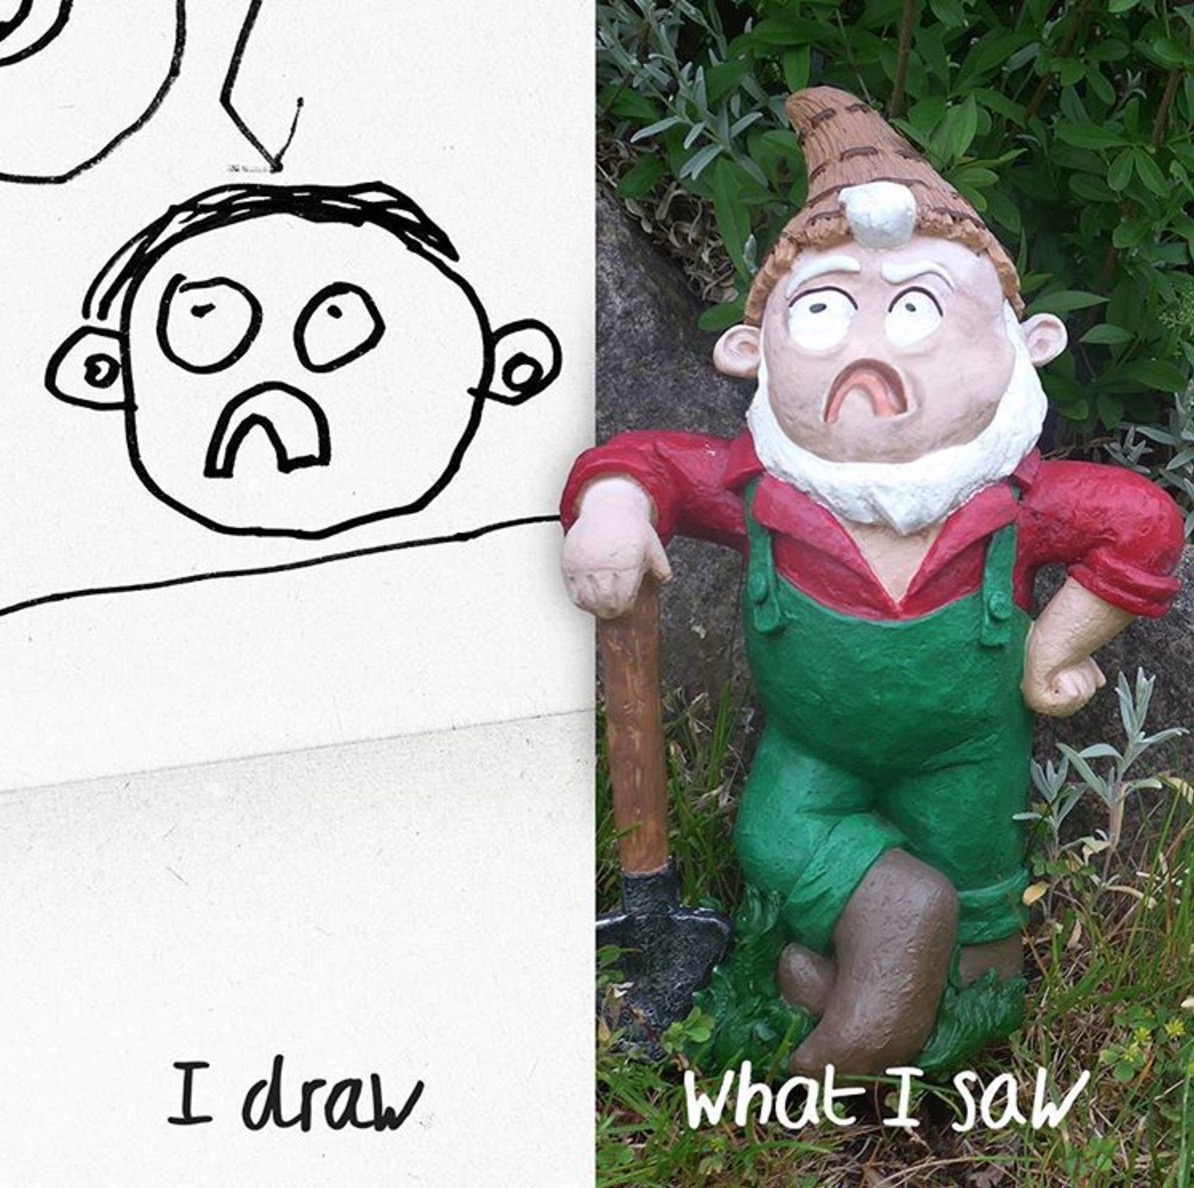 I knew when I drew it, this face looked quite weird
I forgot that my gnome has got a white beard